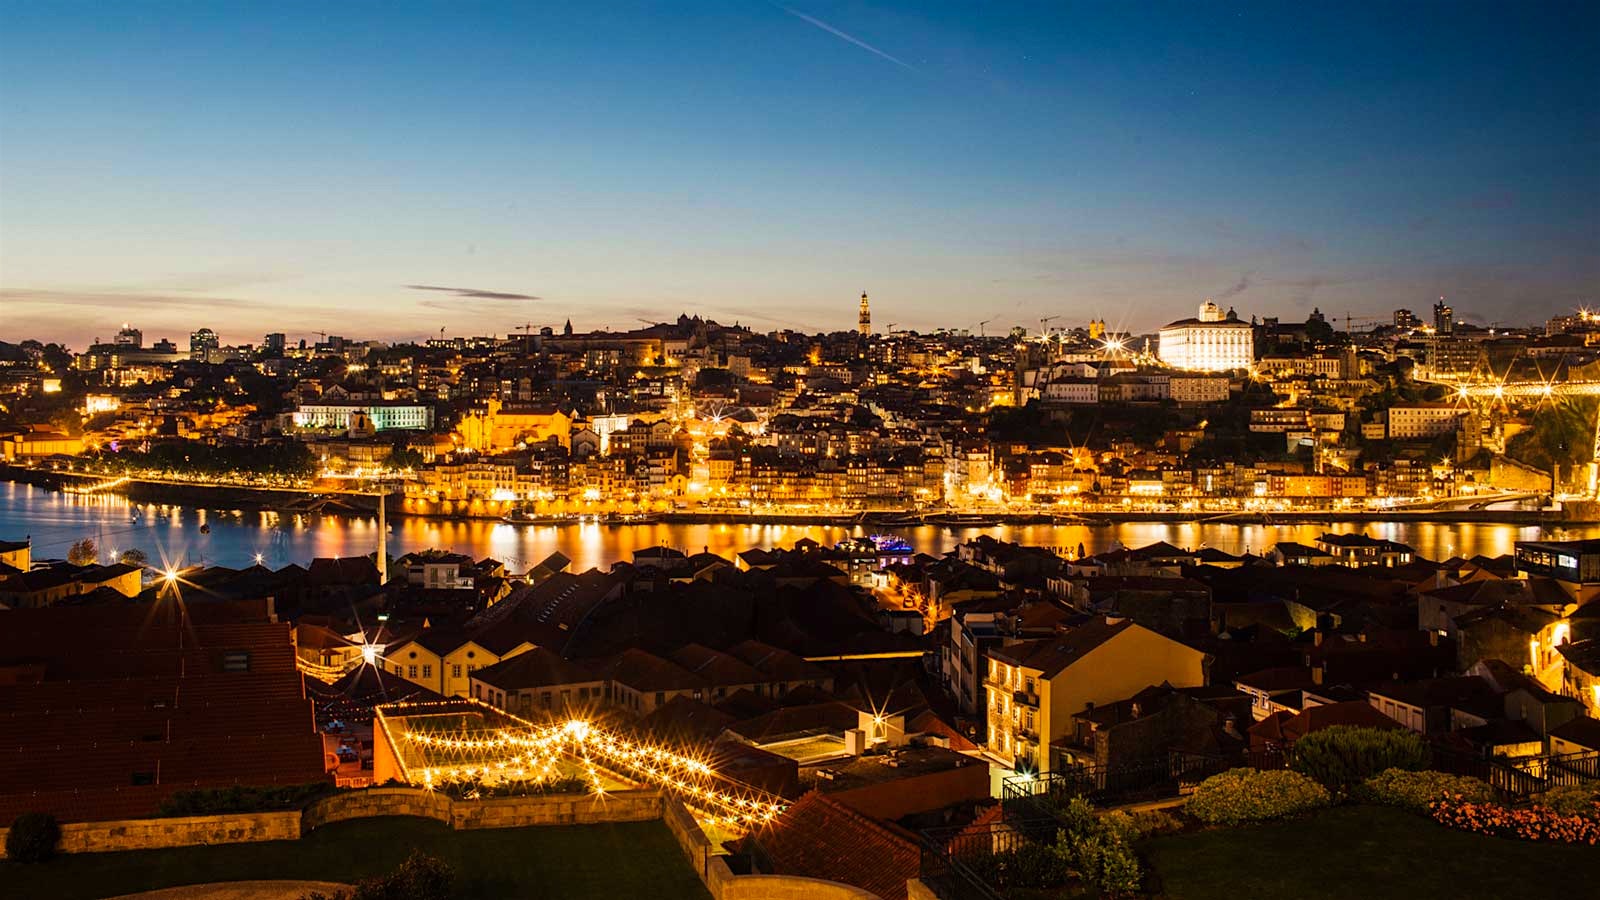  A nighttime view from The Yeatman of Porto and Vila Nova de Gaia, with lights reflecting on the Douro River